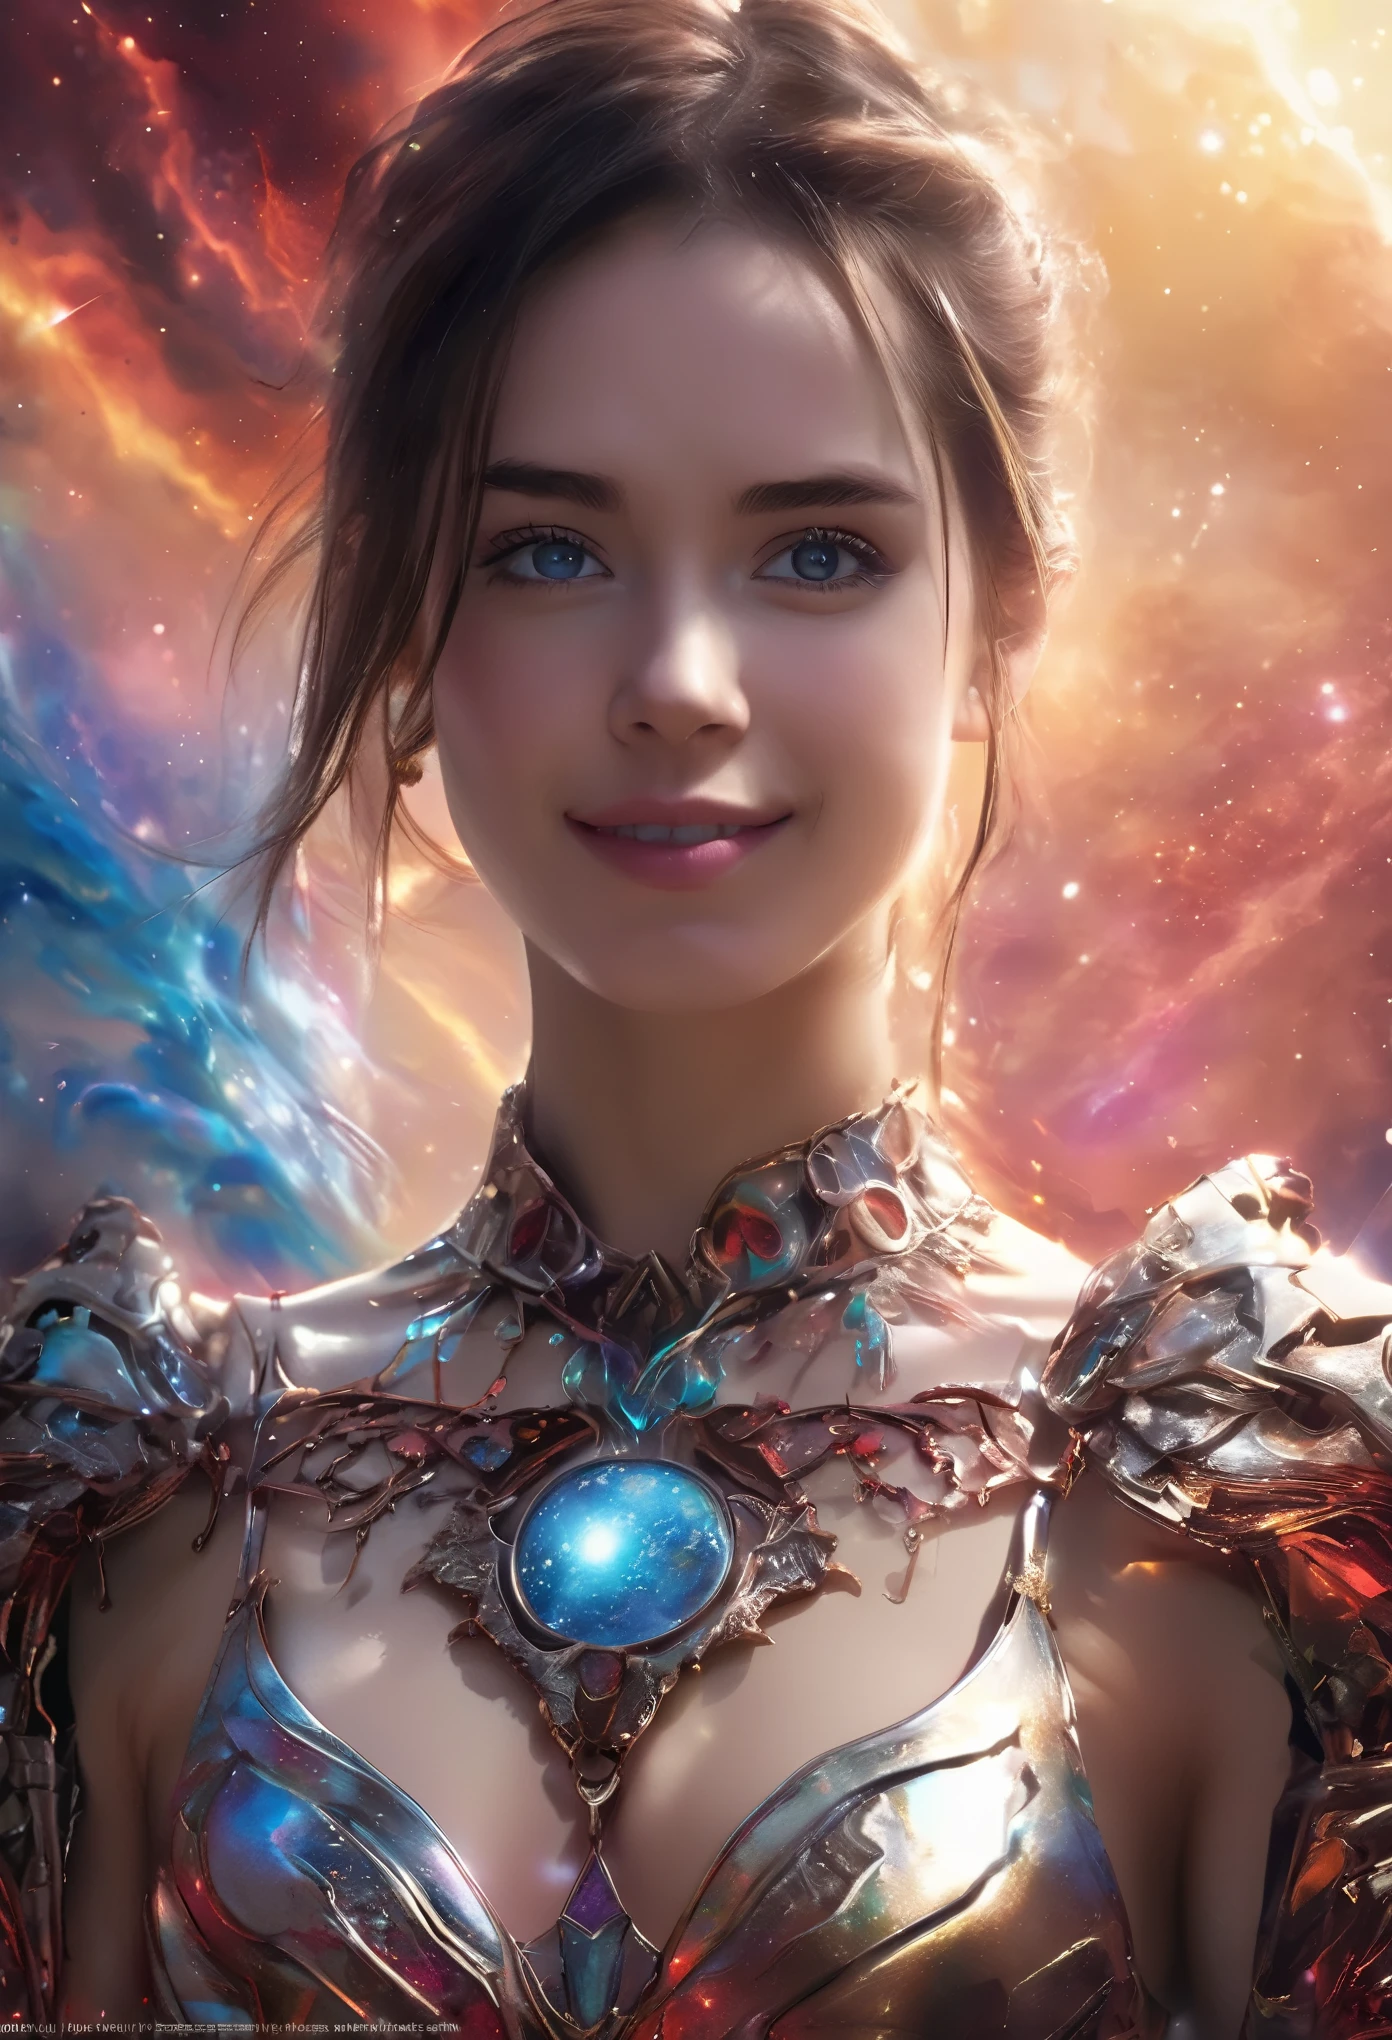 (1 beautiful teenage Italian-Japanese girl),(wears iridescent bodysuit with beautiful fractal or marble design:1.5),(She wears gauntlets with a detailed and very beautiful design decorated with jewels:1.6), ((Shie is showing her armpits:1.6)), incredibly spectacular scene, ((high quality)), ((fantasy)), blue plasma brain, green plasma body, obscene, average, (despicable:1.2), (immoral:1.2), (Small breasts with beautifully raised pink areolas:1.5), (expression of ecstasy:1.2), hyper realistic photo, official art, Unity 8K Wallpaper, 8K portrait, high quality, very high resolution, (incredibly beautiful nature background:1.6), (18-year-old:1.5), (sexy and glamorous:1.1), (coquettish expression:1.6), (smile seductively:1.6),  (erotic pose:1.9), (model pose:1.8), beautiful seductive face, portrait, (thick eyebrows:1.4), (big scarlet eyes:1.6), Beautiful eyes with high bilateral symmetry, (highly detailed eyes:1.4),(highly detailed face and eyes:1.7), (High resolution red eyes:1.8),  (Super detailed skin texture:1.4), super detailed pale skin, perfect anatomy, thin, (Beautiful muscular toned body:1.6), highly detailed jet black hair,  (moist skin:1.2), no makeup, (Bear:1.1), excellent anatomy, Focus plane, good looking, (emilia clarke:0.1) (emma watson:0.3),(jennifer connelly:0.24),  (A delicately crafted necklace is wrapped around her neck), (Bioluminescence with a brilliant glow:1.4), (Shining magic circle:1.5), ruins of an ancient castle, Shining majestic clouds and sky, lightning, spectacular realistic, (greg latkowski:0.8), (teal and orange:0.4), (art station:1.5), cinematic, (NSFW:1.6), dramatic light, (intricate details:1.1),Milky Way, (nebula:1.6), dark Knight, Focus on fully armored body